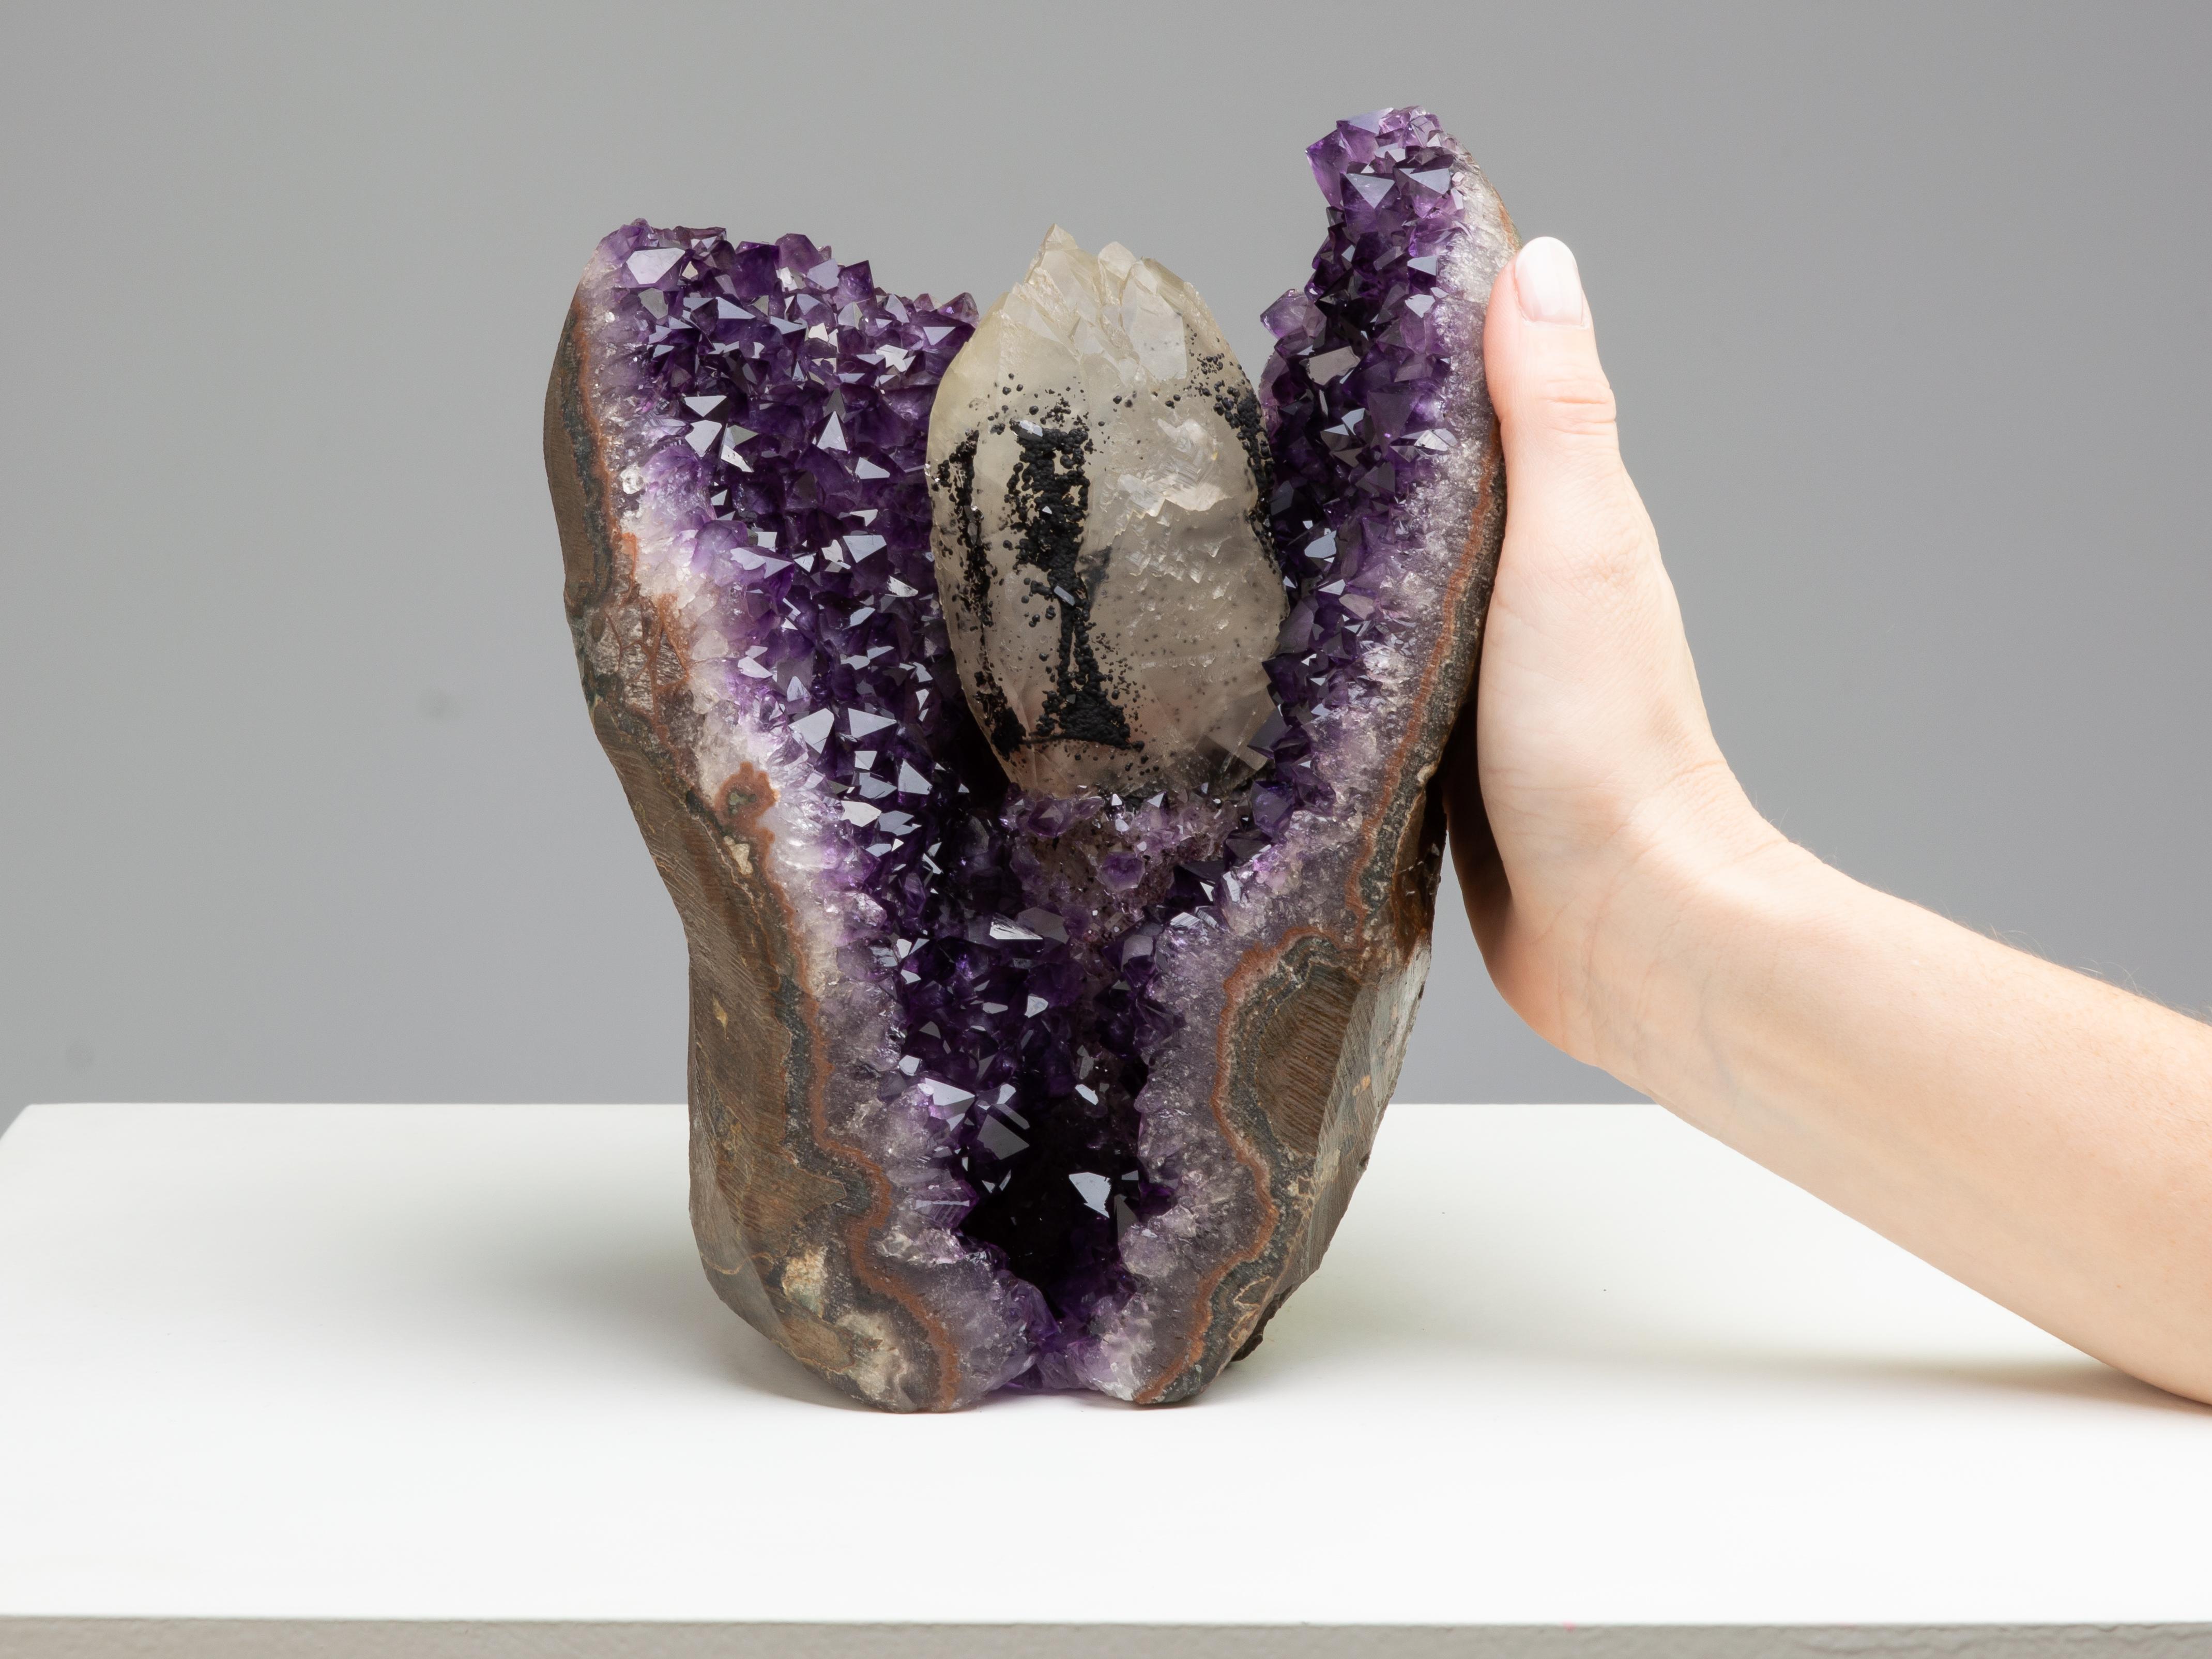 18th Century and Earlier Angel Shaped Amethyst Crystals and Calcite mineral formation